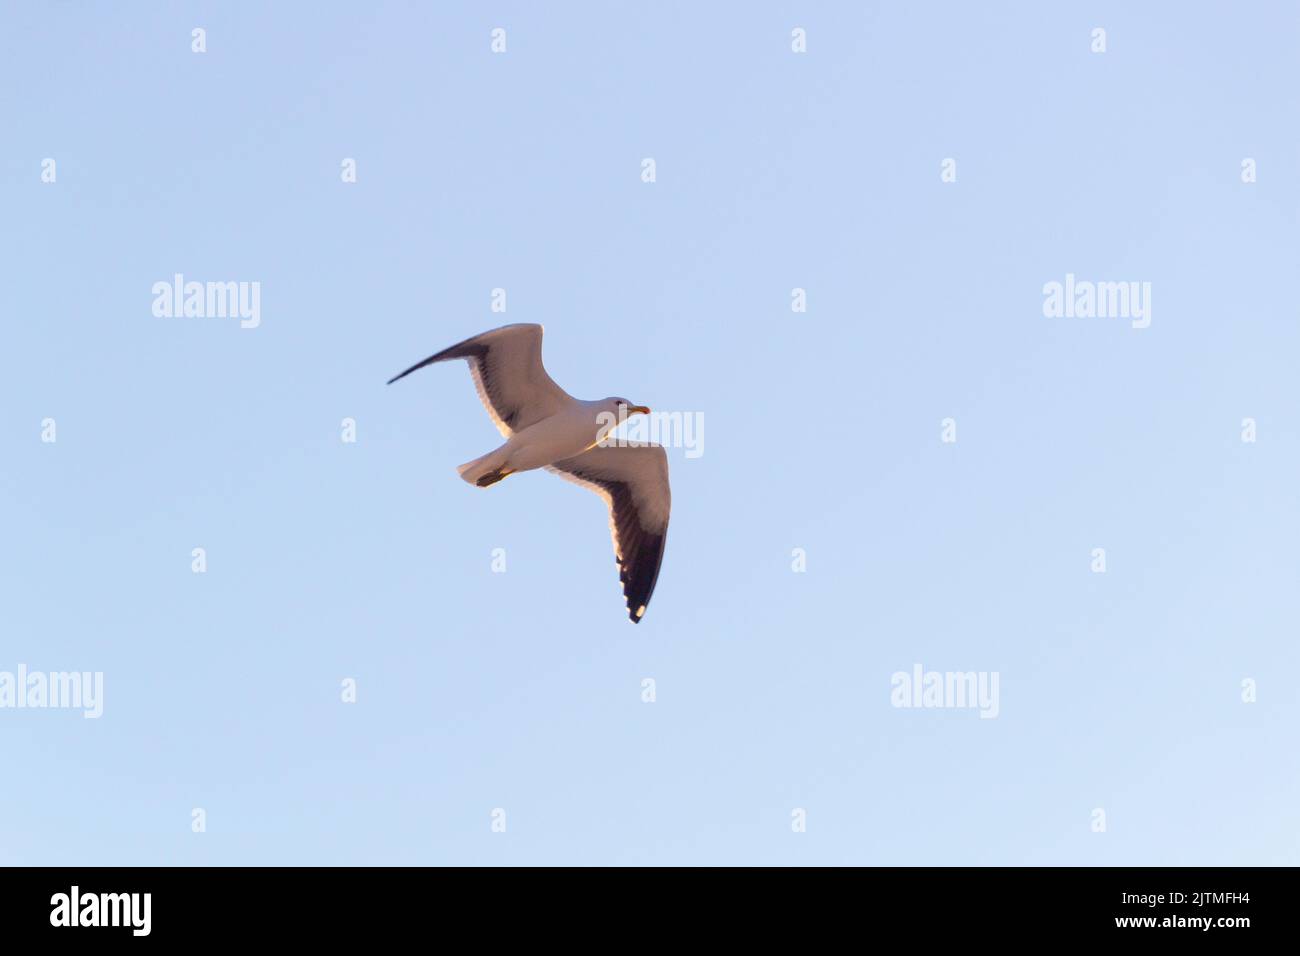 Silver gull flying with a blue sky in the background in Rio de Janeiro Brazil. Stock Photo